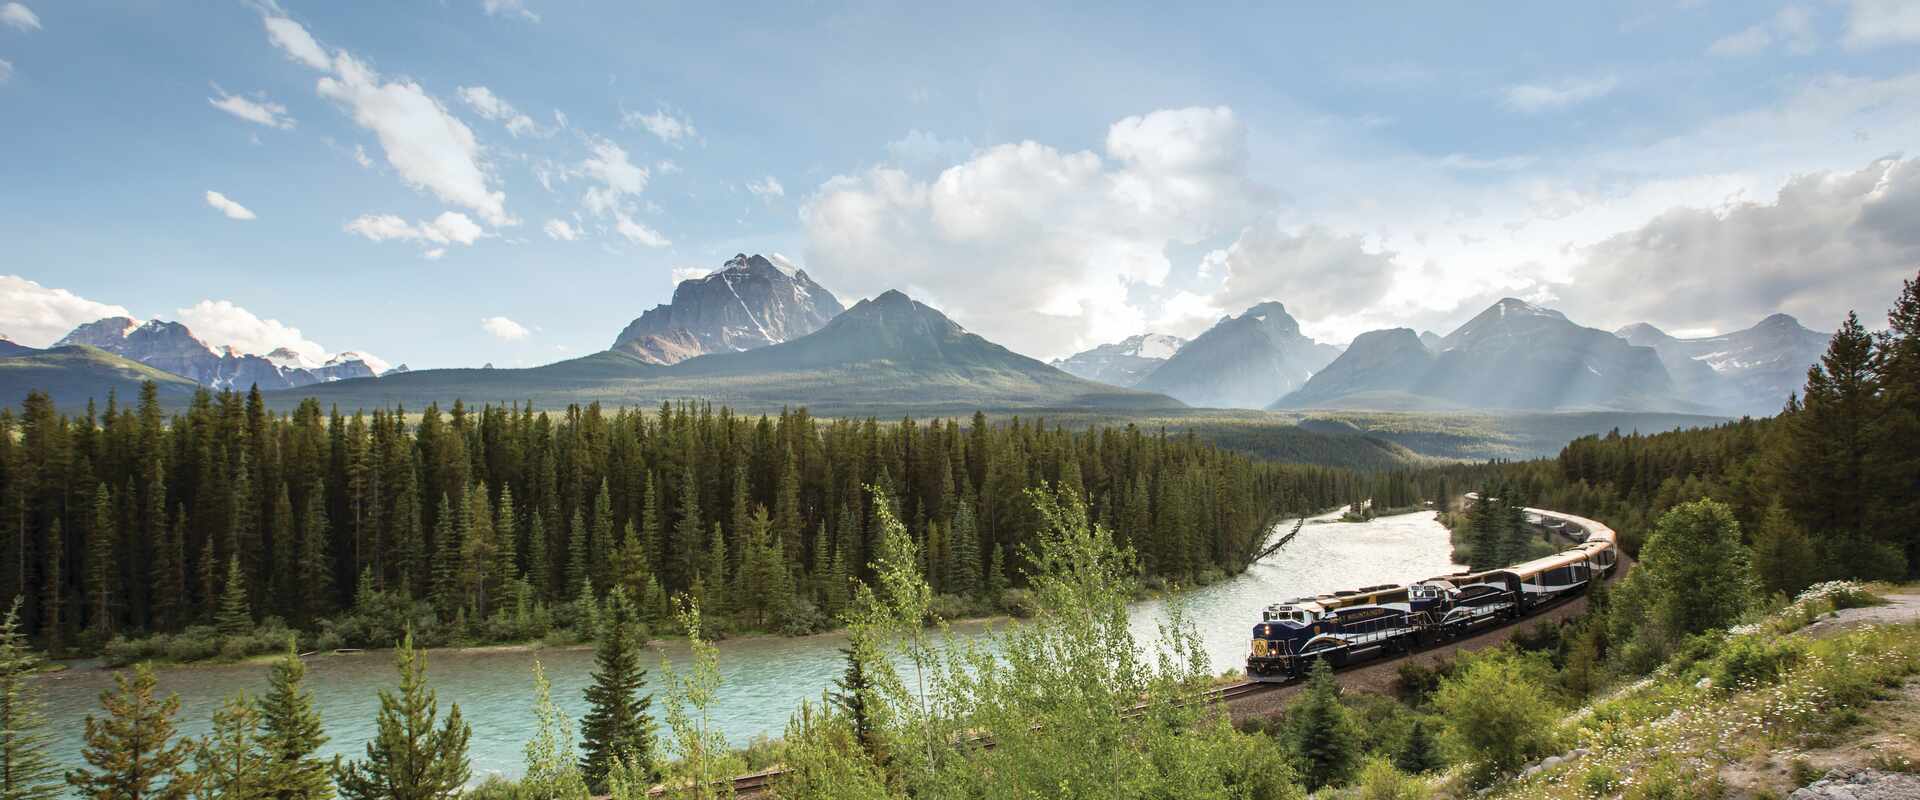 View of Rocky Mountaineer with Rockies Scenery, Canada